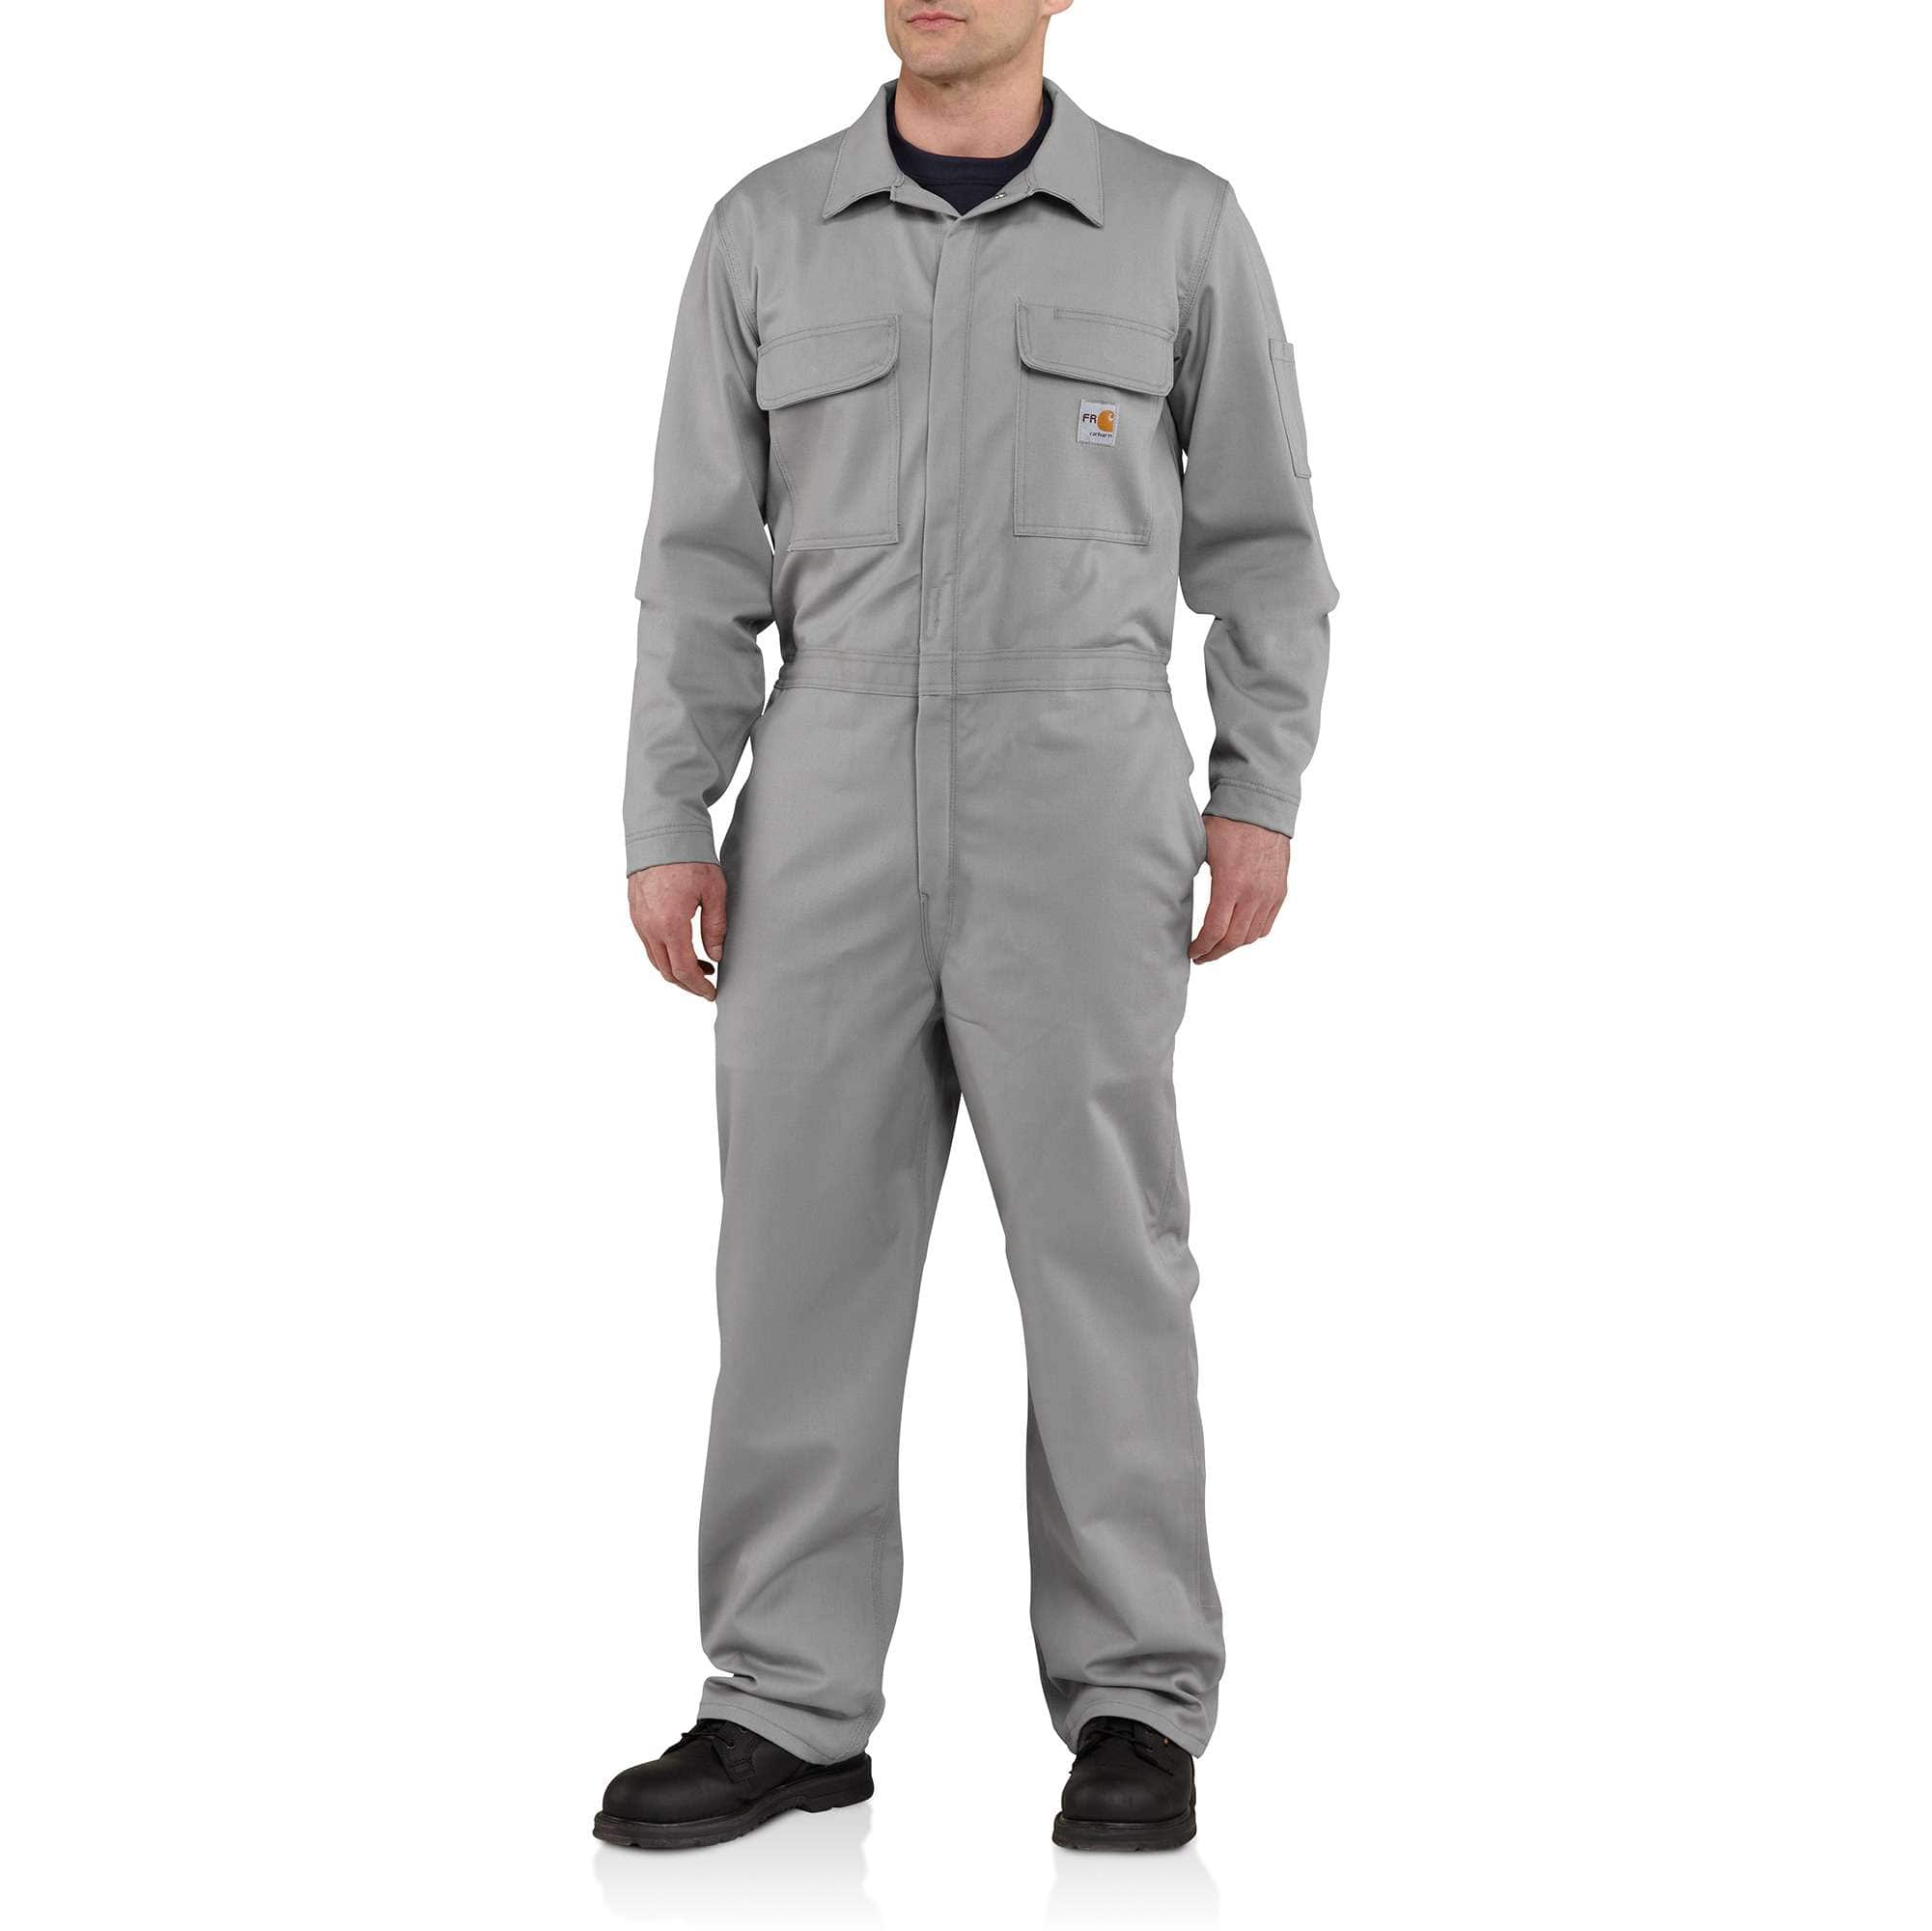 Carhartt Mens Wildwood Coverall Work Utility Coveralls